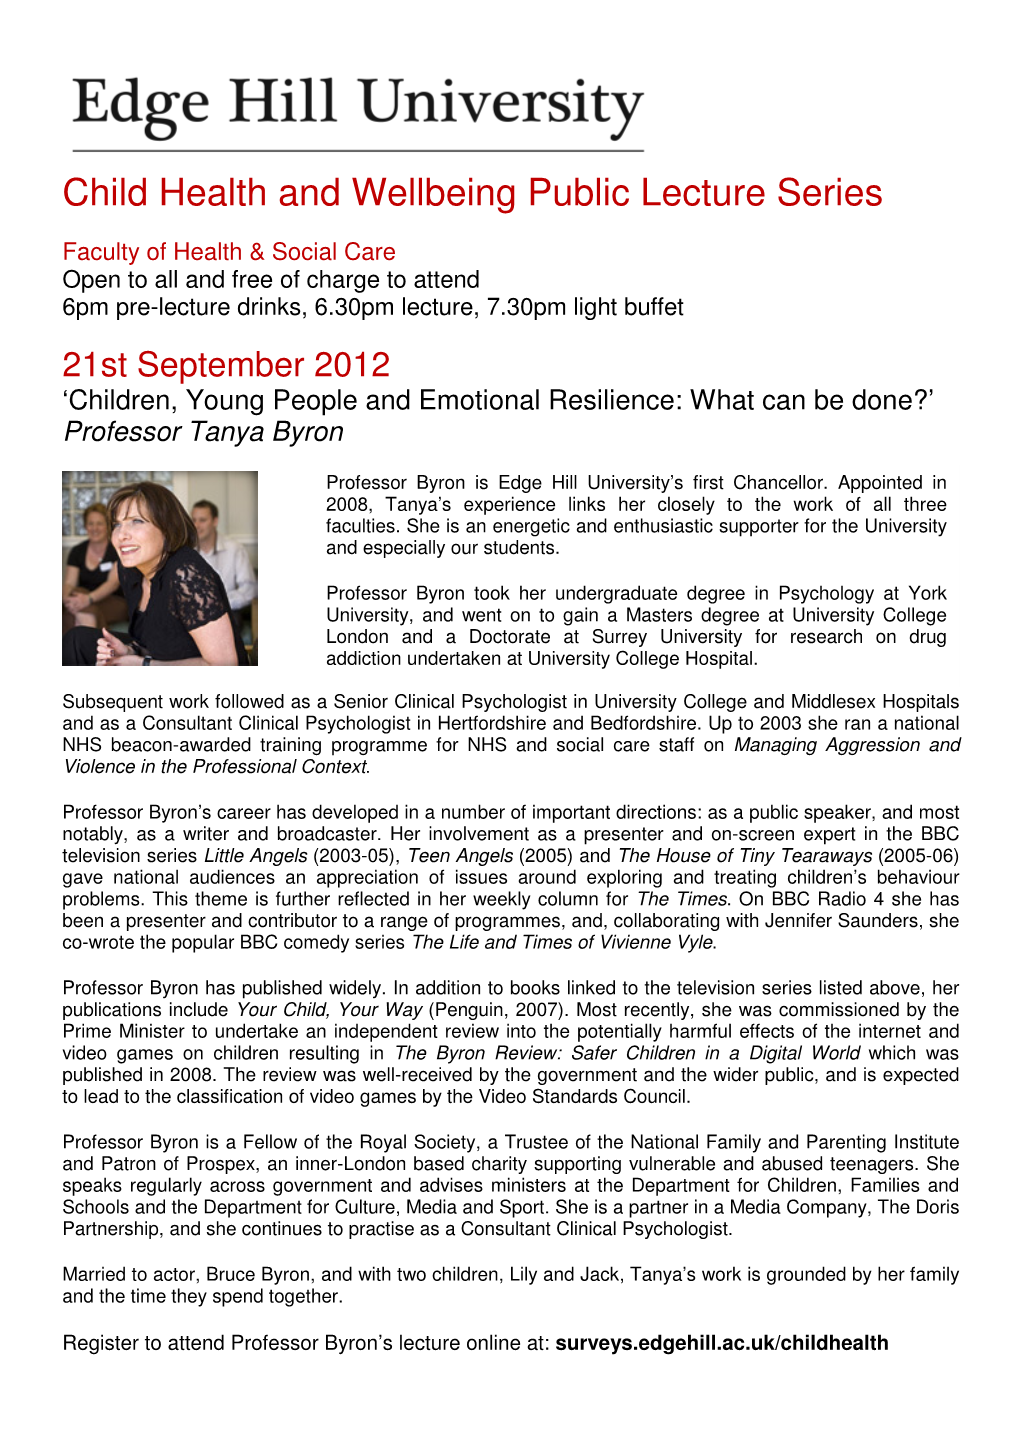 Child Health and Wellbeing Public Lecture Series